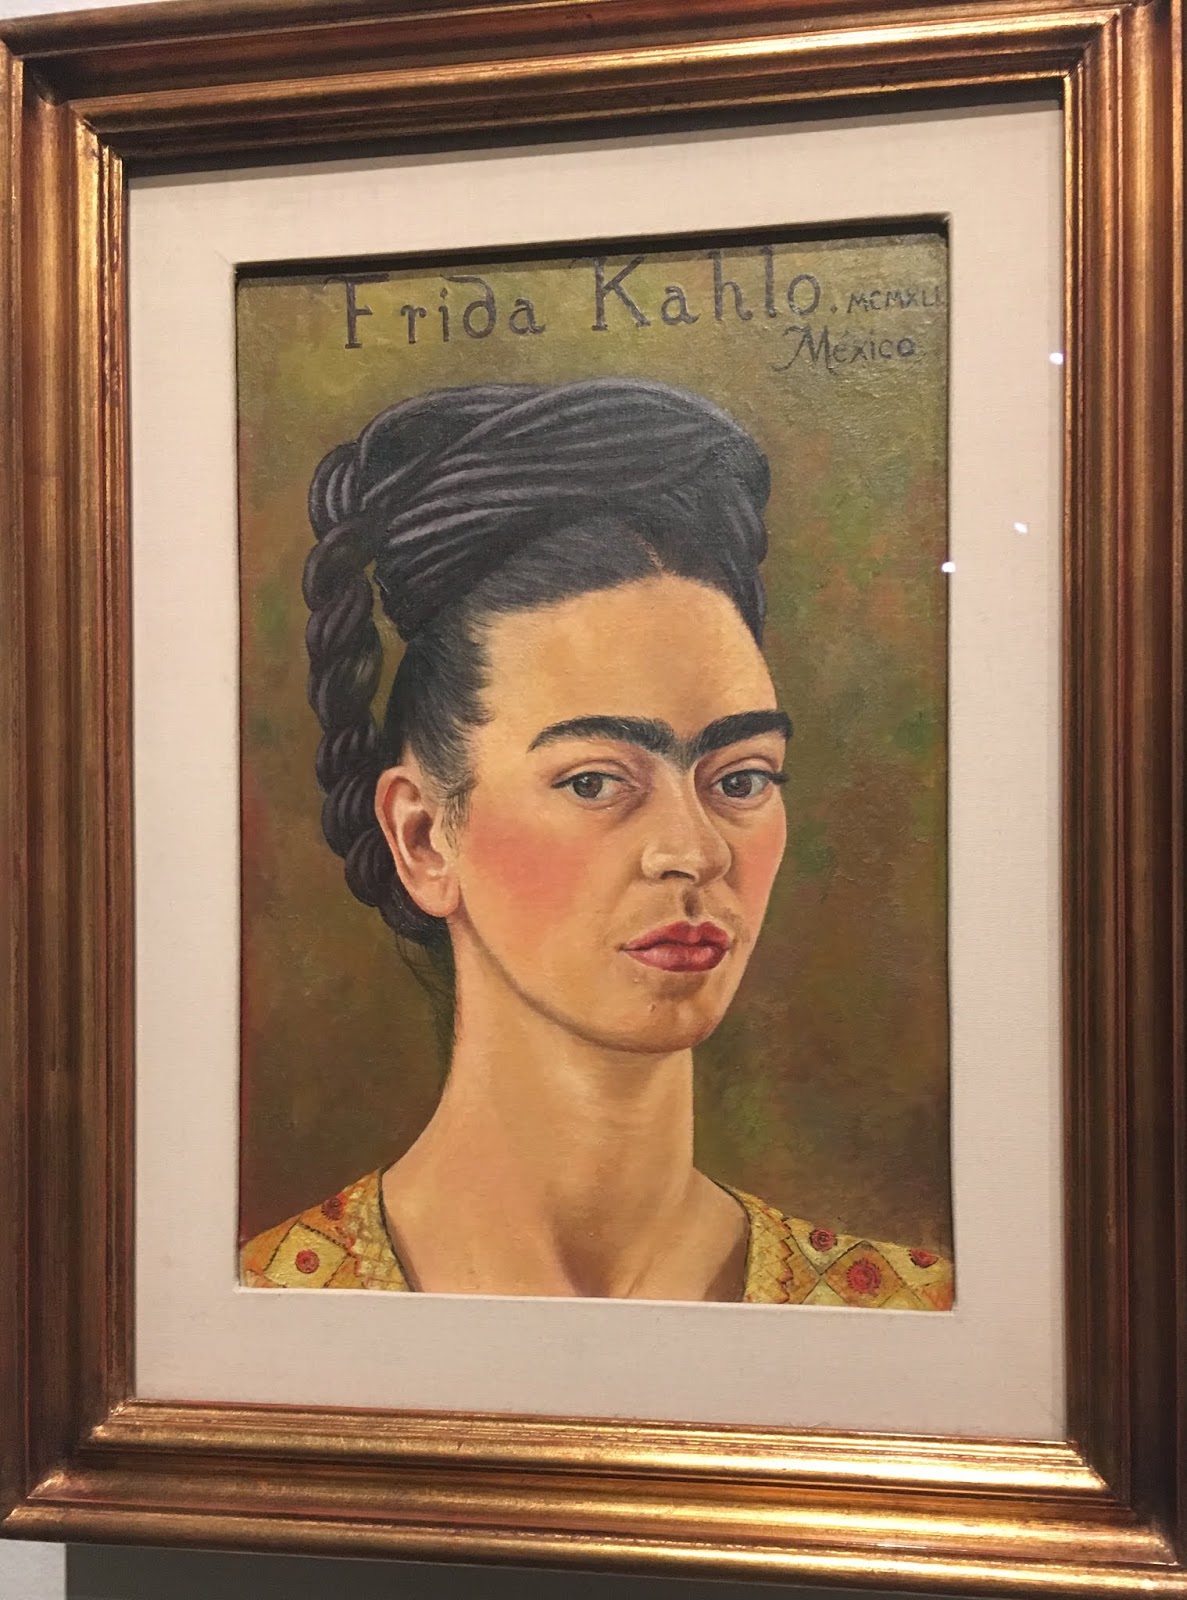 Rome frida our story